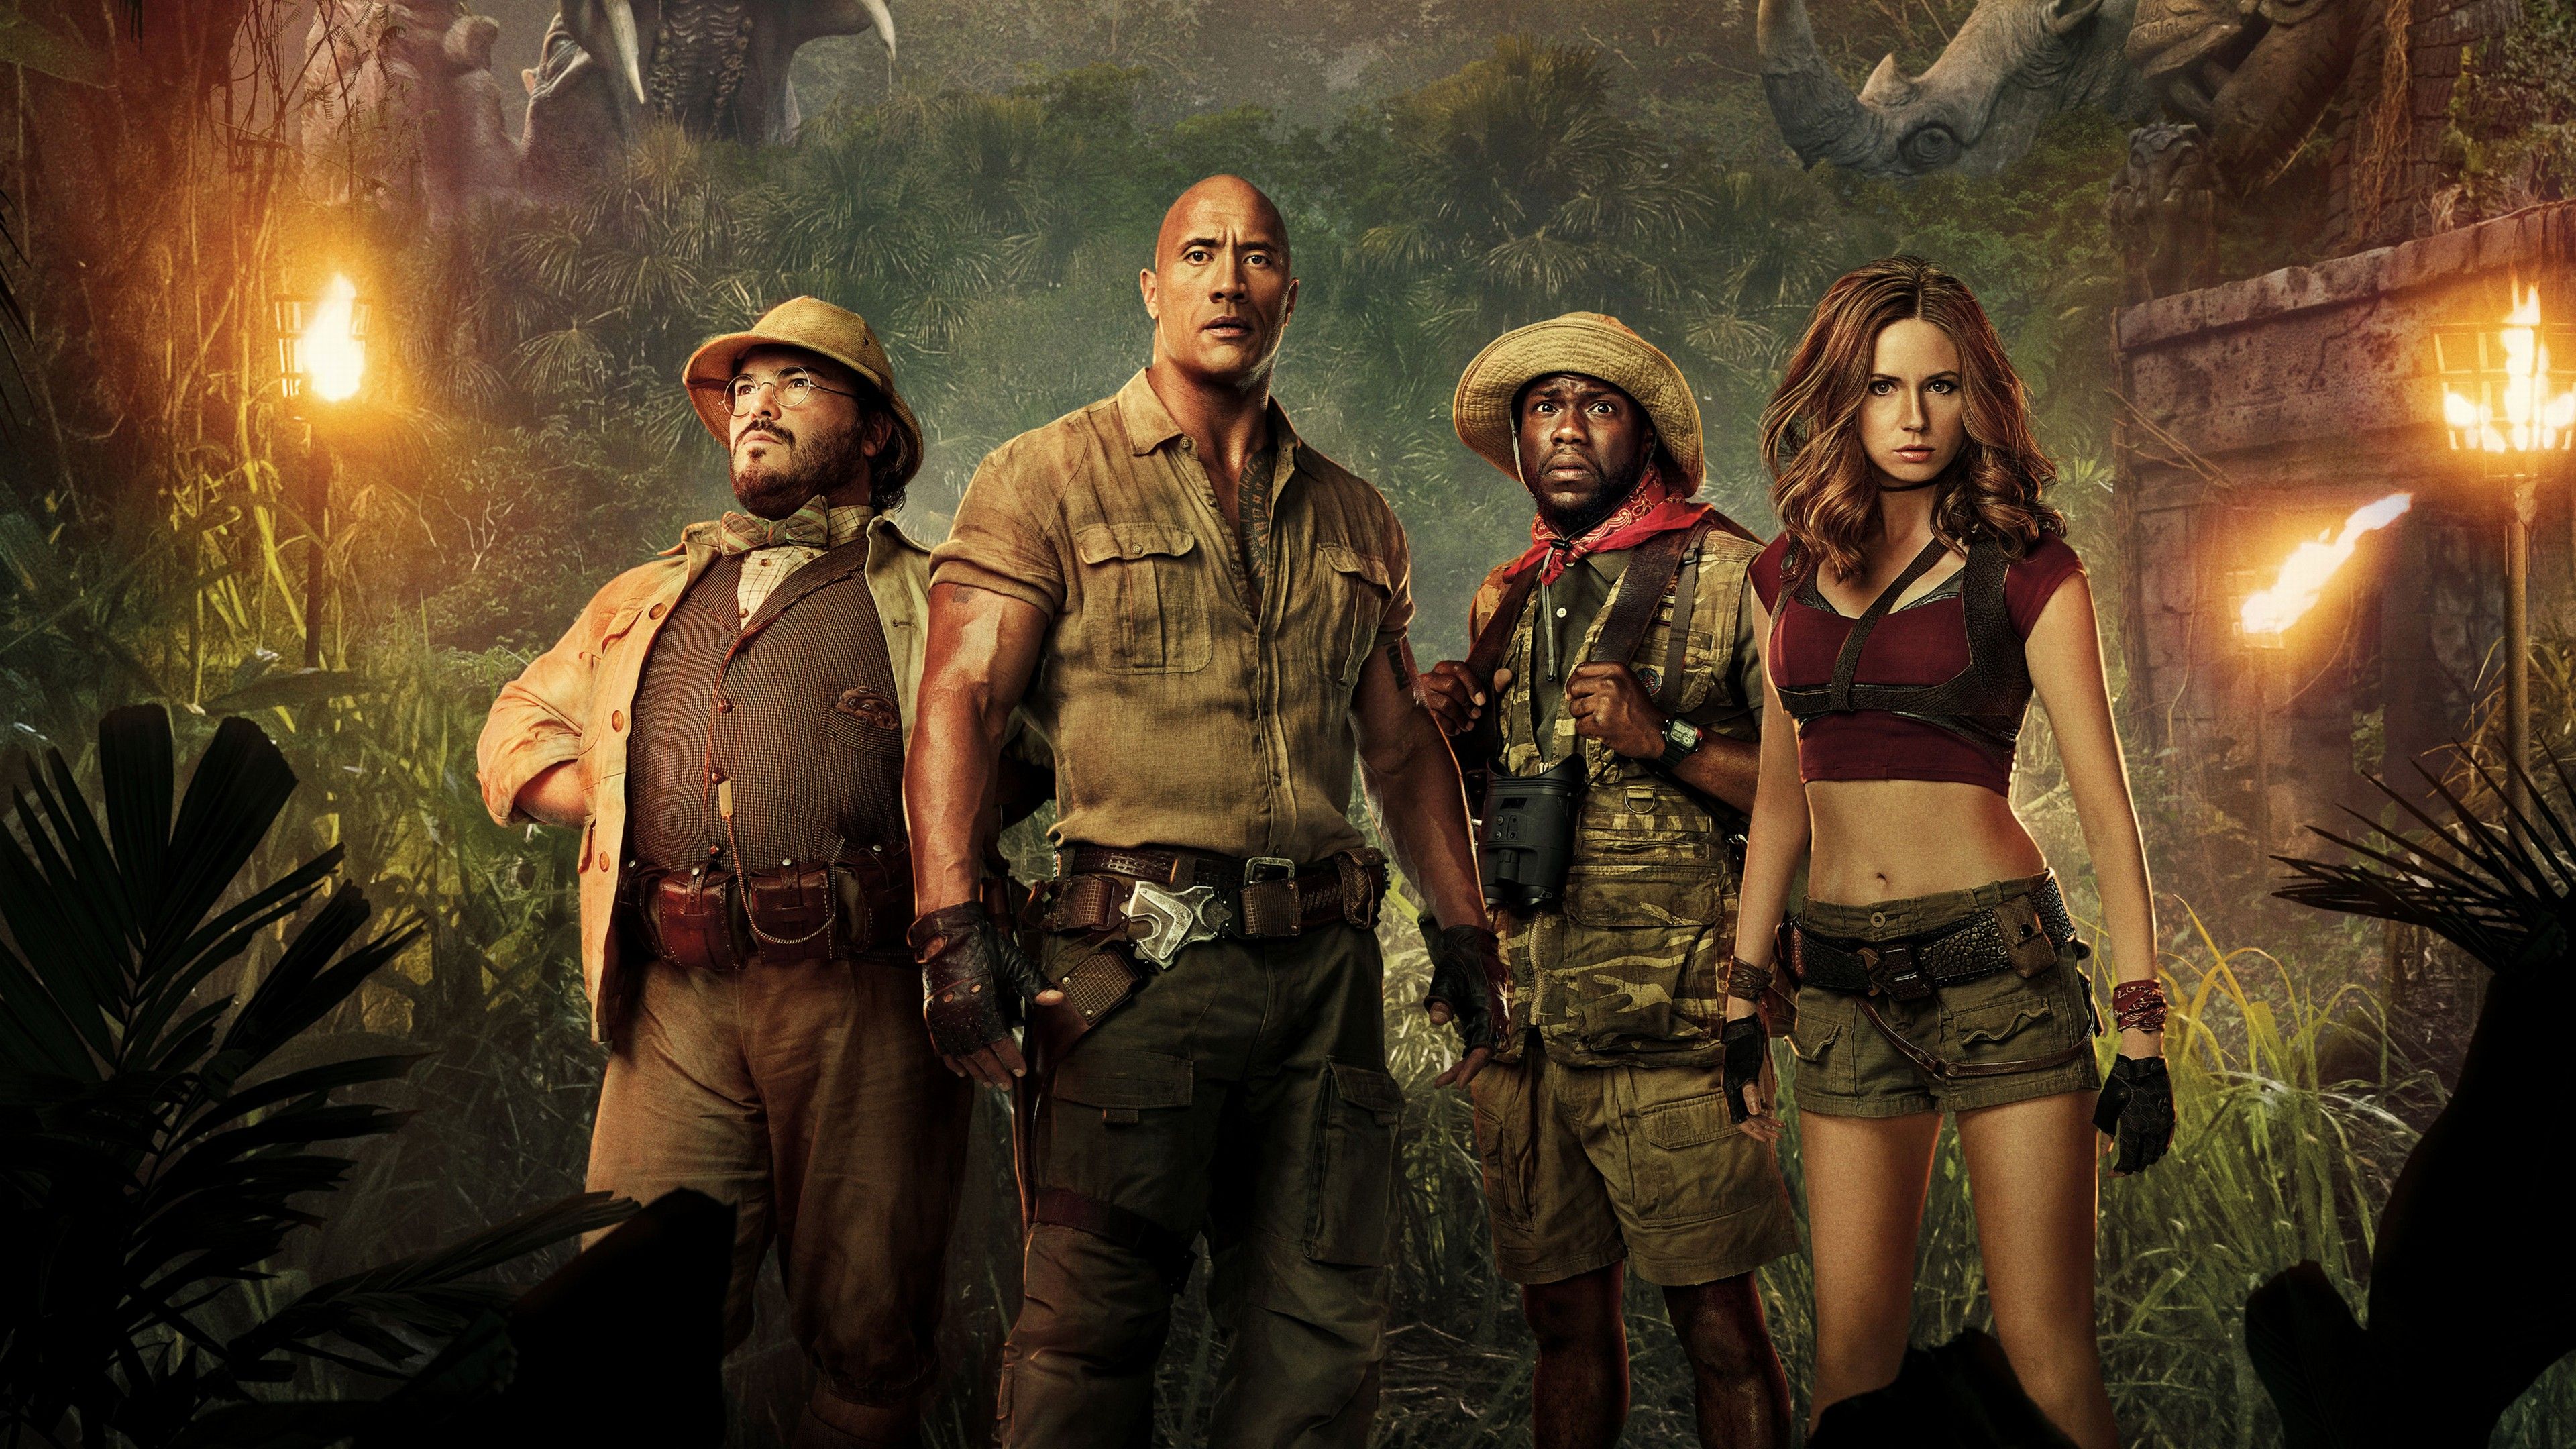 Jumanji Welcome To The Jungle Wallpaper Download in HD 4K Size